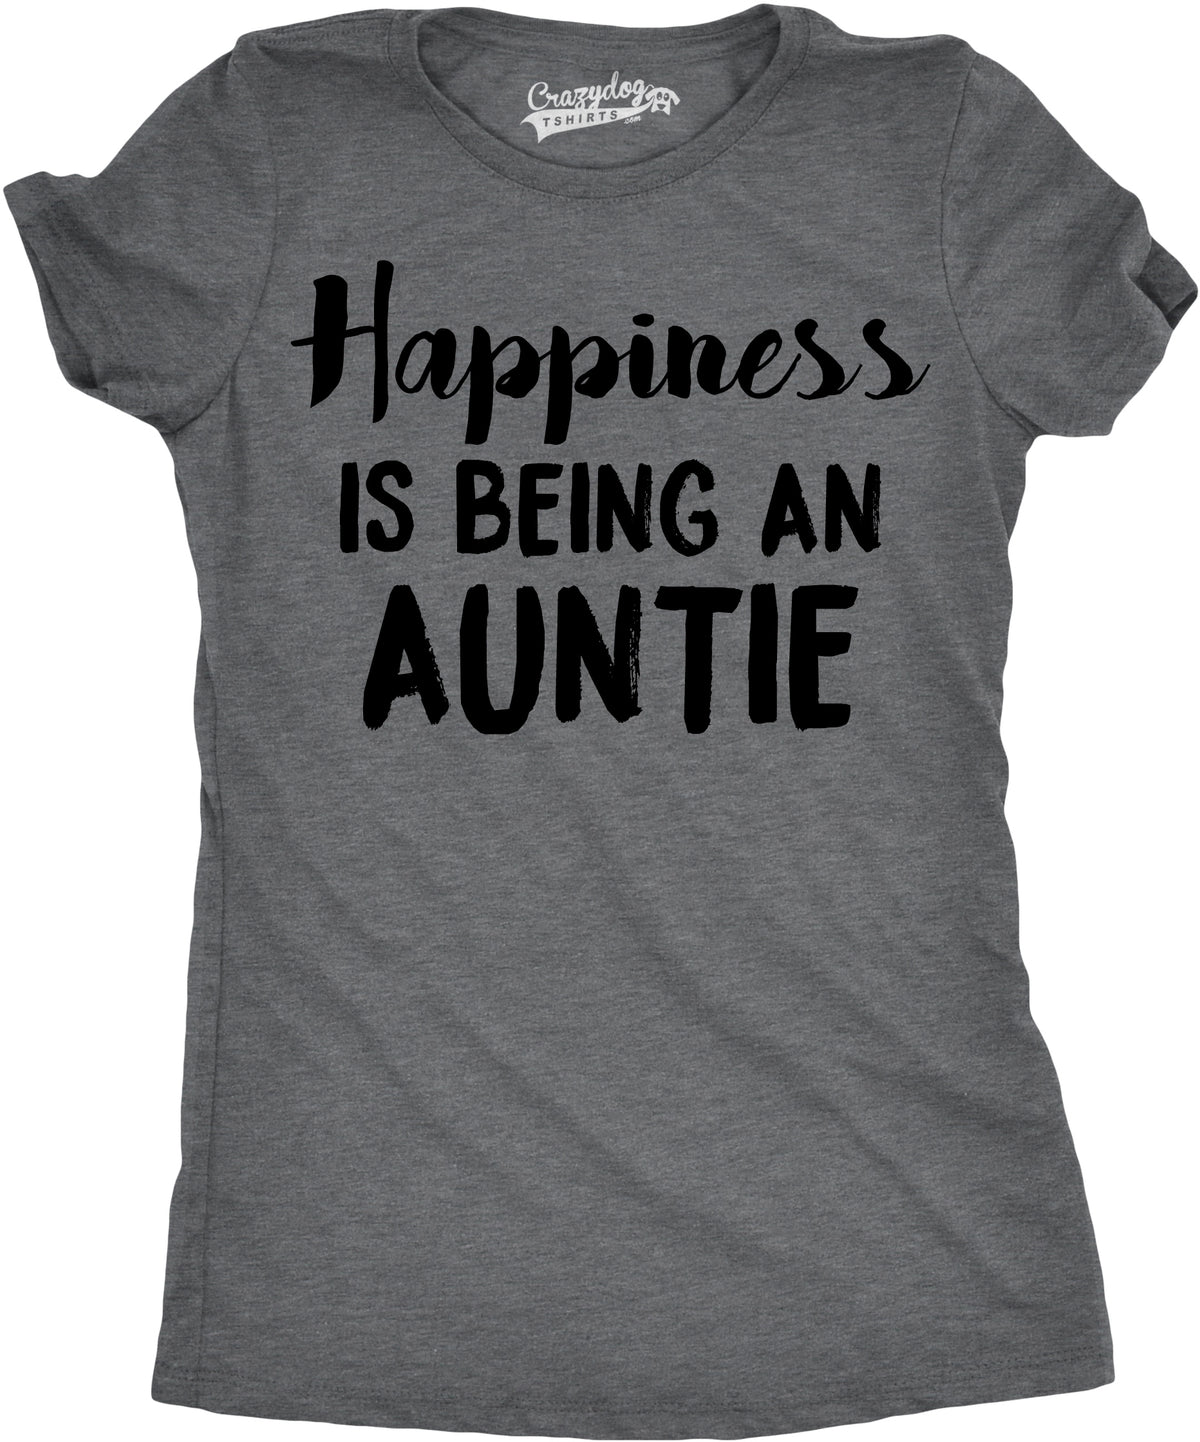 Funny Dark Heather Grey Happiness is Being an Auntie Womens T Shirt Nerdy Aunt Tee